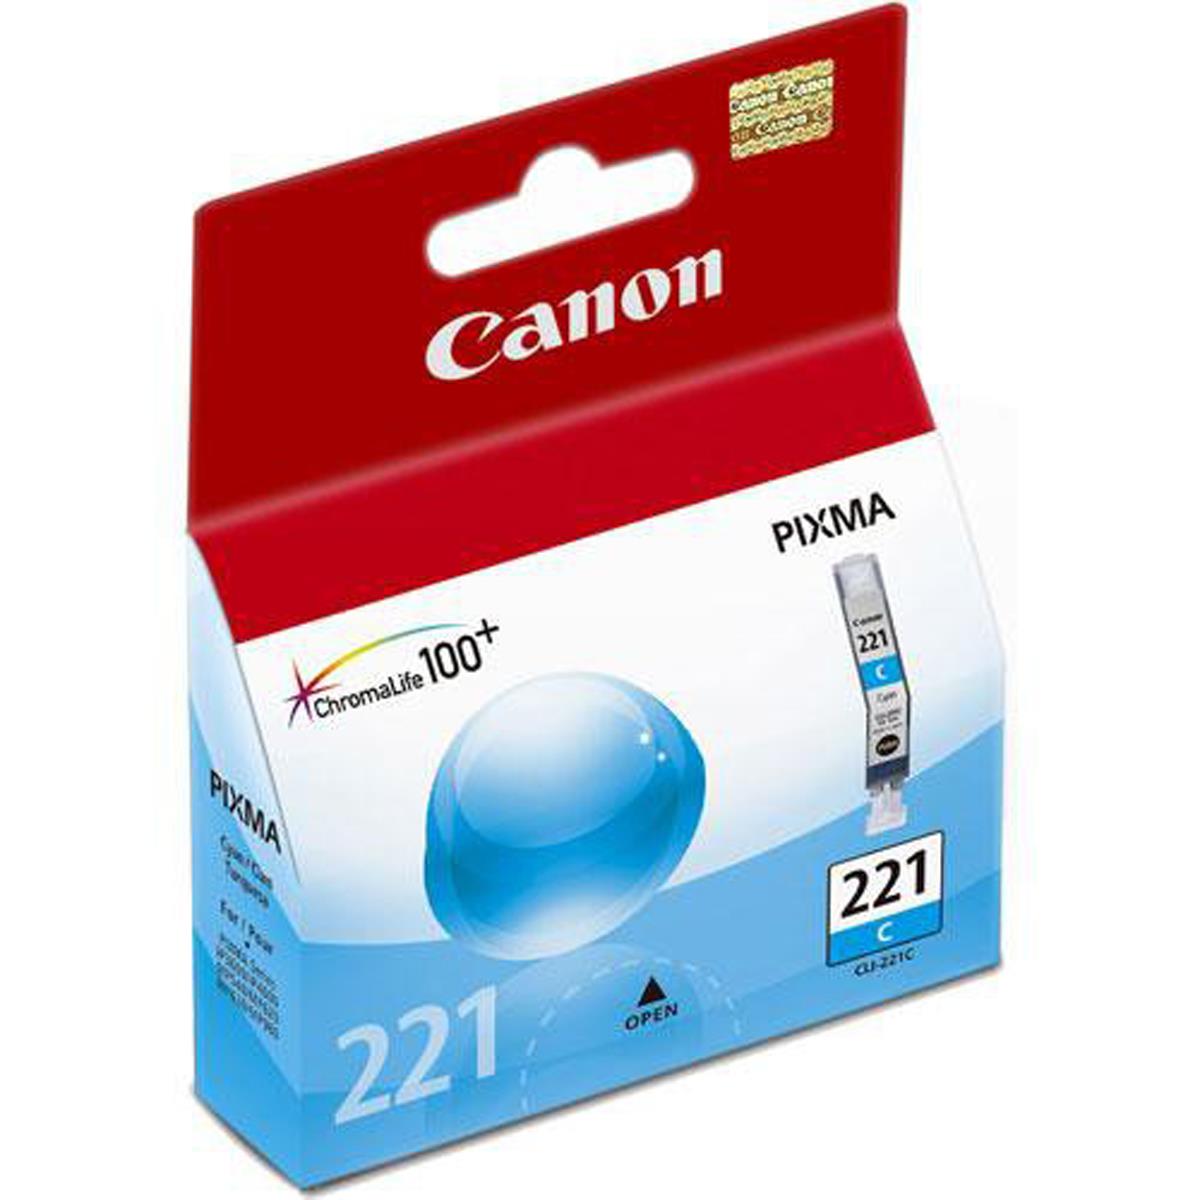 

Canon CLI-221C Cyan Color Ink Tank for Select PIXMA iP, MP, MX Series Printers